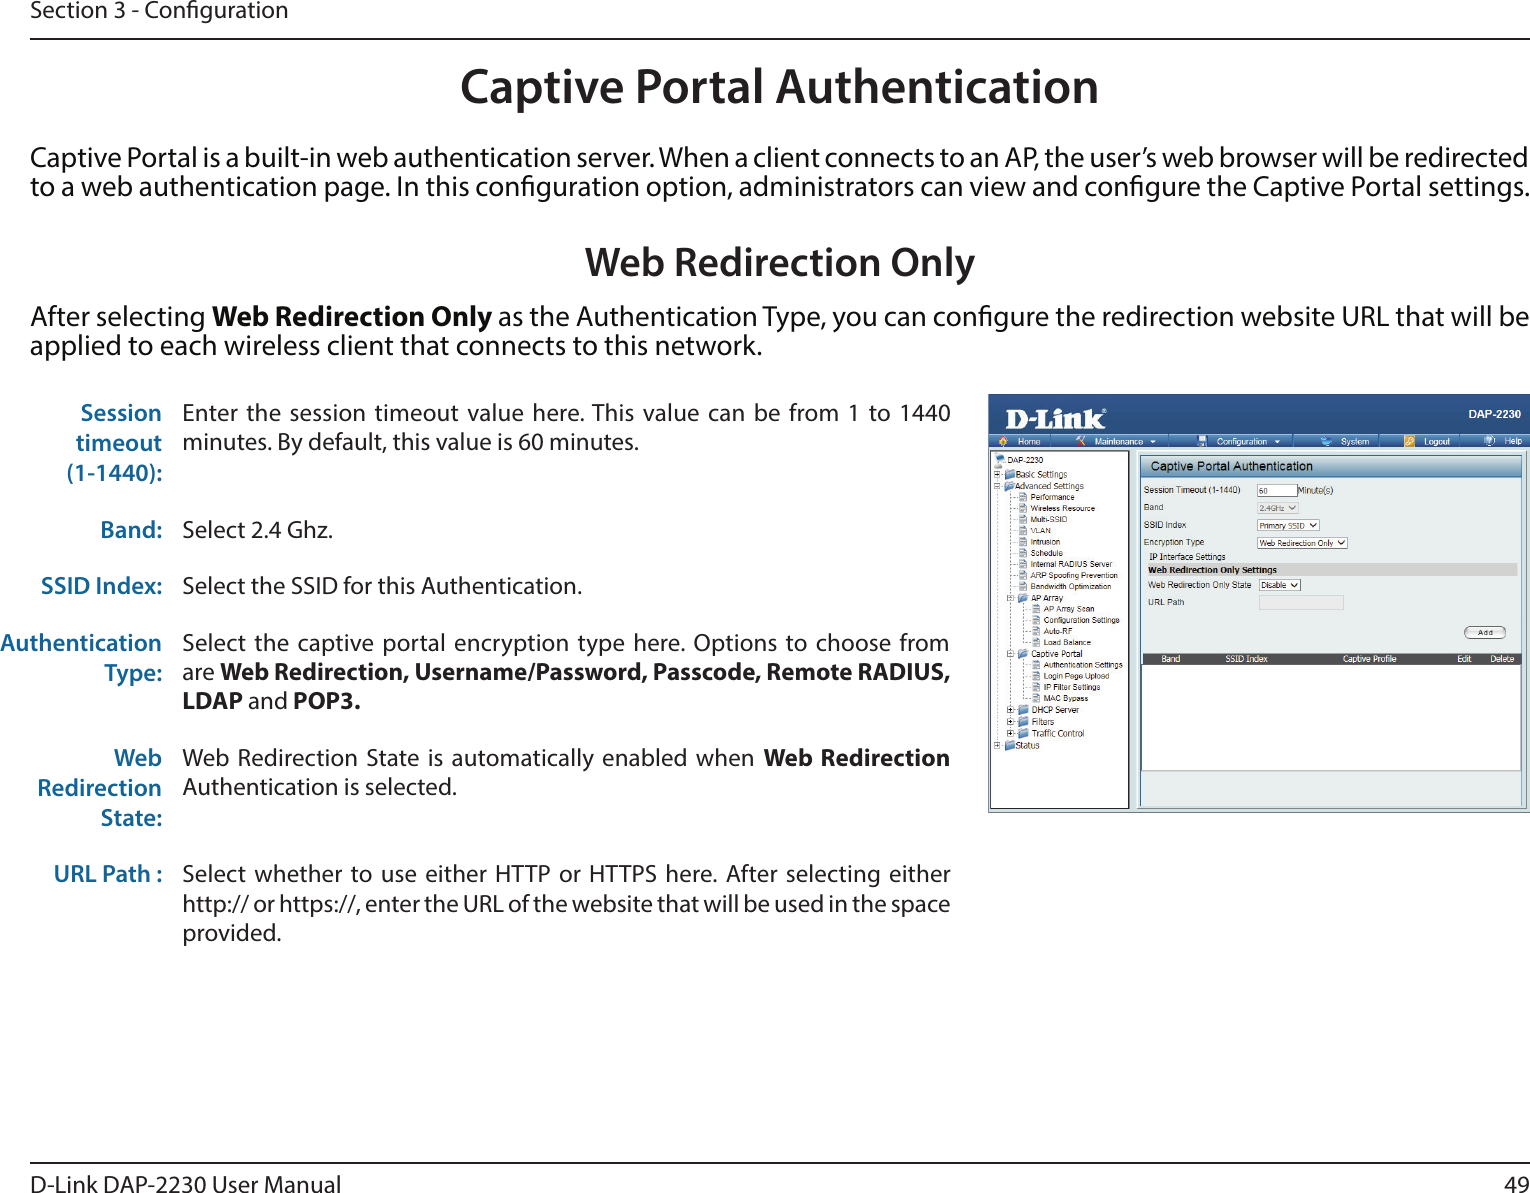 49D-Link DAP-2230 User ManualSection 3 - CongurationCaptive Portal AuthenticationCaptive Portal is a built-in web authentication server. When a client connects to an AP, the user’s web browser will be redirected to a web authentication page. In this conguration option, administrators can view and congure the Captive Portal settings. Sessiontimeout(1-1440):Enter the session timeout value here. This value can be from 1 to 1440 minutes. By default, this value is 60 minutes.Band: Select 2.4 Ghz.SSID Index: Select the SSID for this Authentication.Authentication Type: Select the captive portal encryption type here. Options to choose from are Web Redirection, Username/Password, Passcode, Remote RADIUS, LDAP and POP3.Web Redirection State: Web Redirection State is automatically enabled when Web Redirection Authentication is selected.URL Path :  Select whether to use either HTTP or HTTPS here. After selecting either http:// or https://, enter the URL of the website that will be used in the space provided.Web Redirection OnlyAfter selecting Web Redirection Only as the Authentication Type, you can congure the redirection website URL that will be applied to each wireless client that connects to this network.